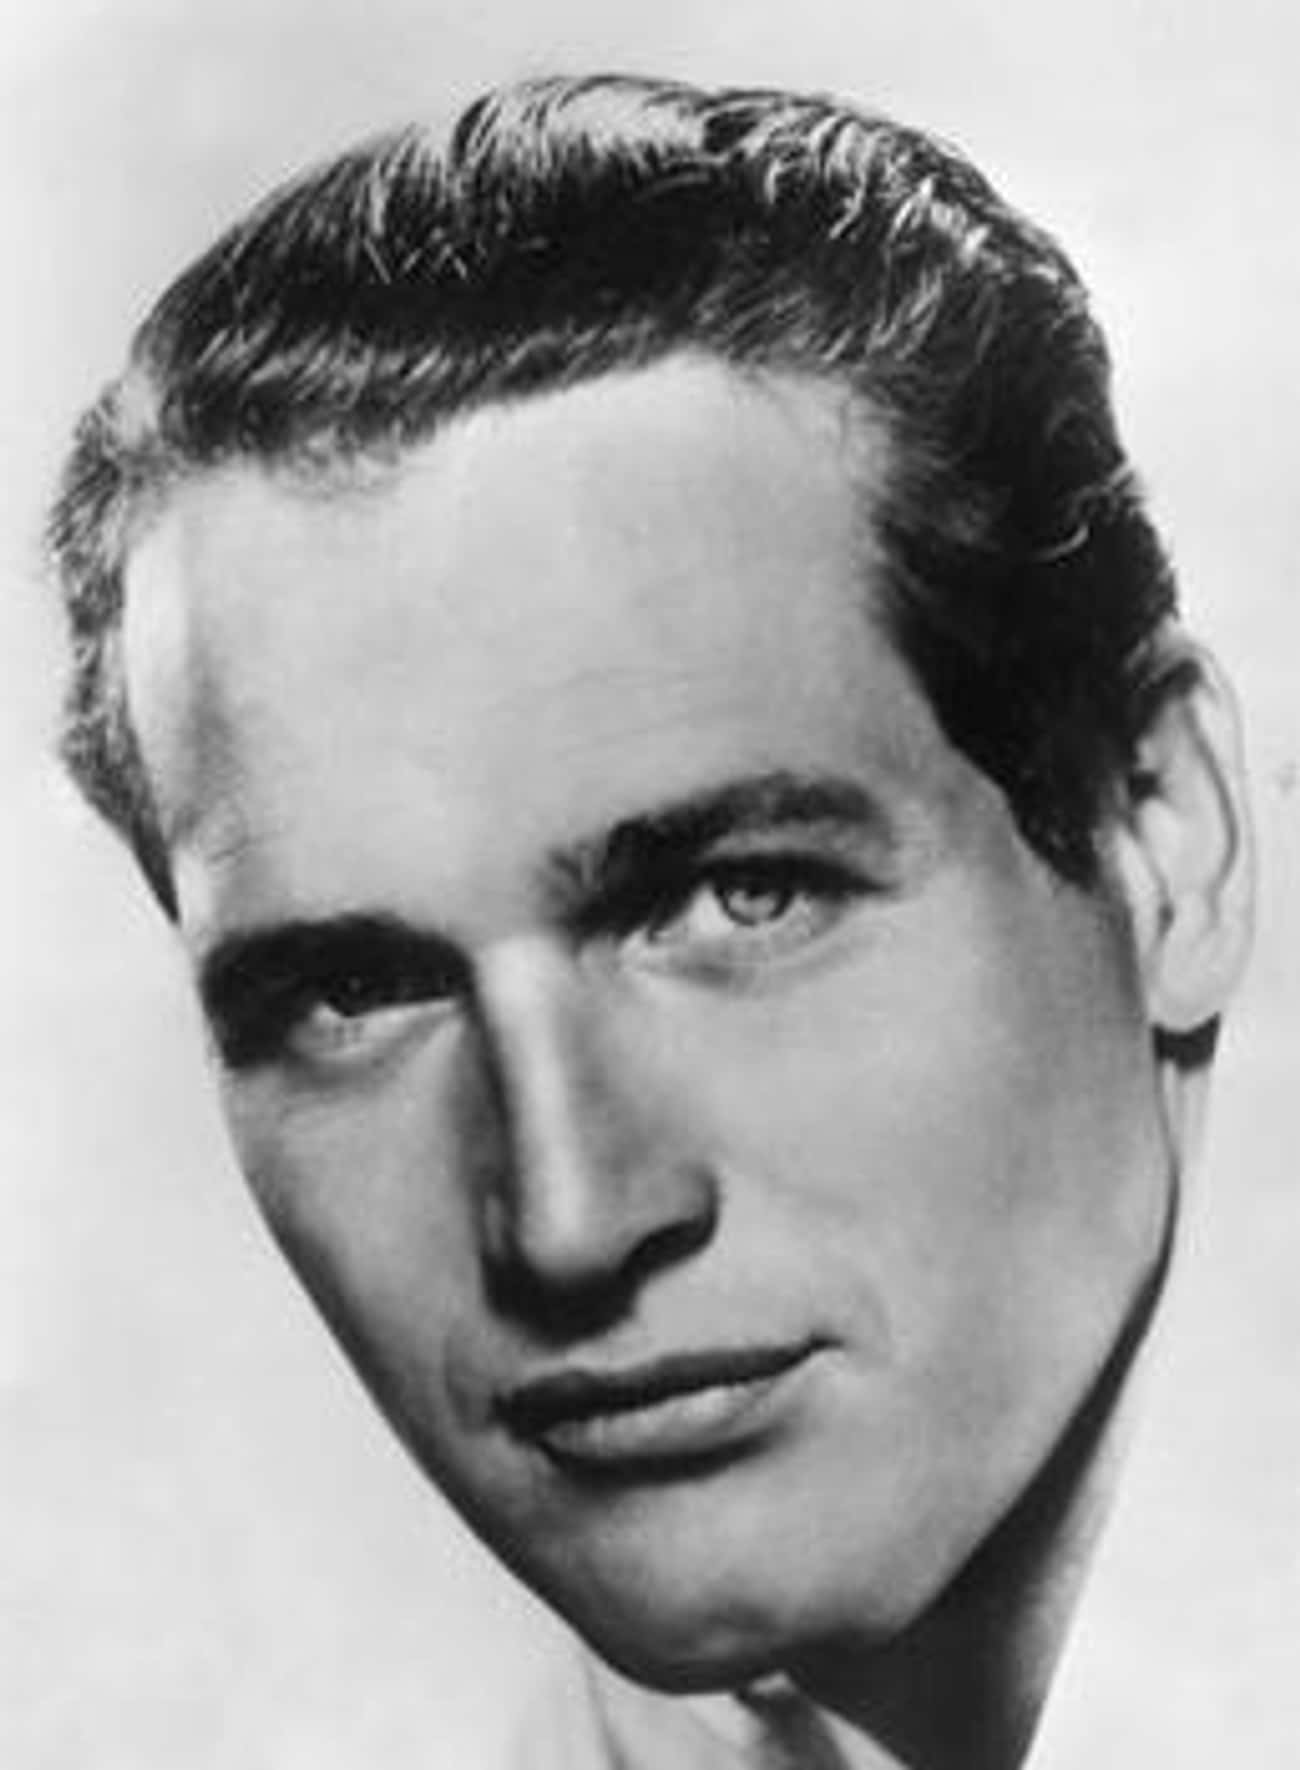 Young Paul Newman Closeup Black and White